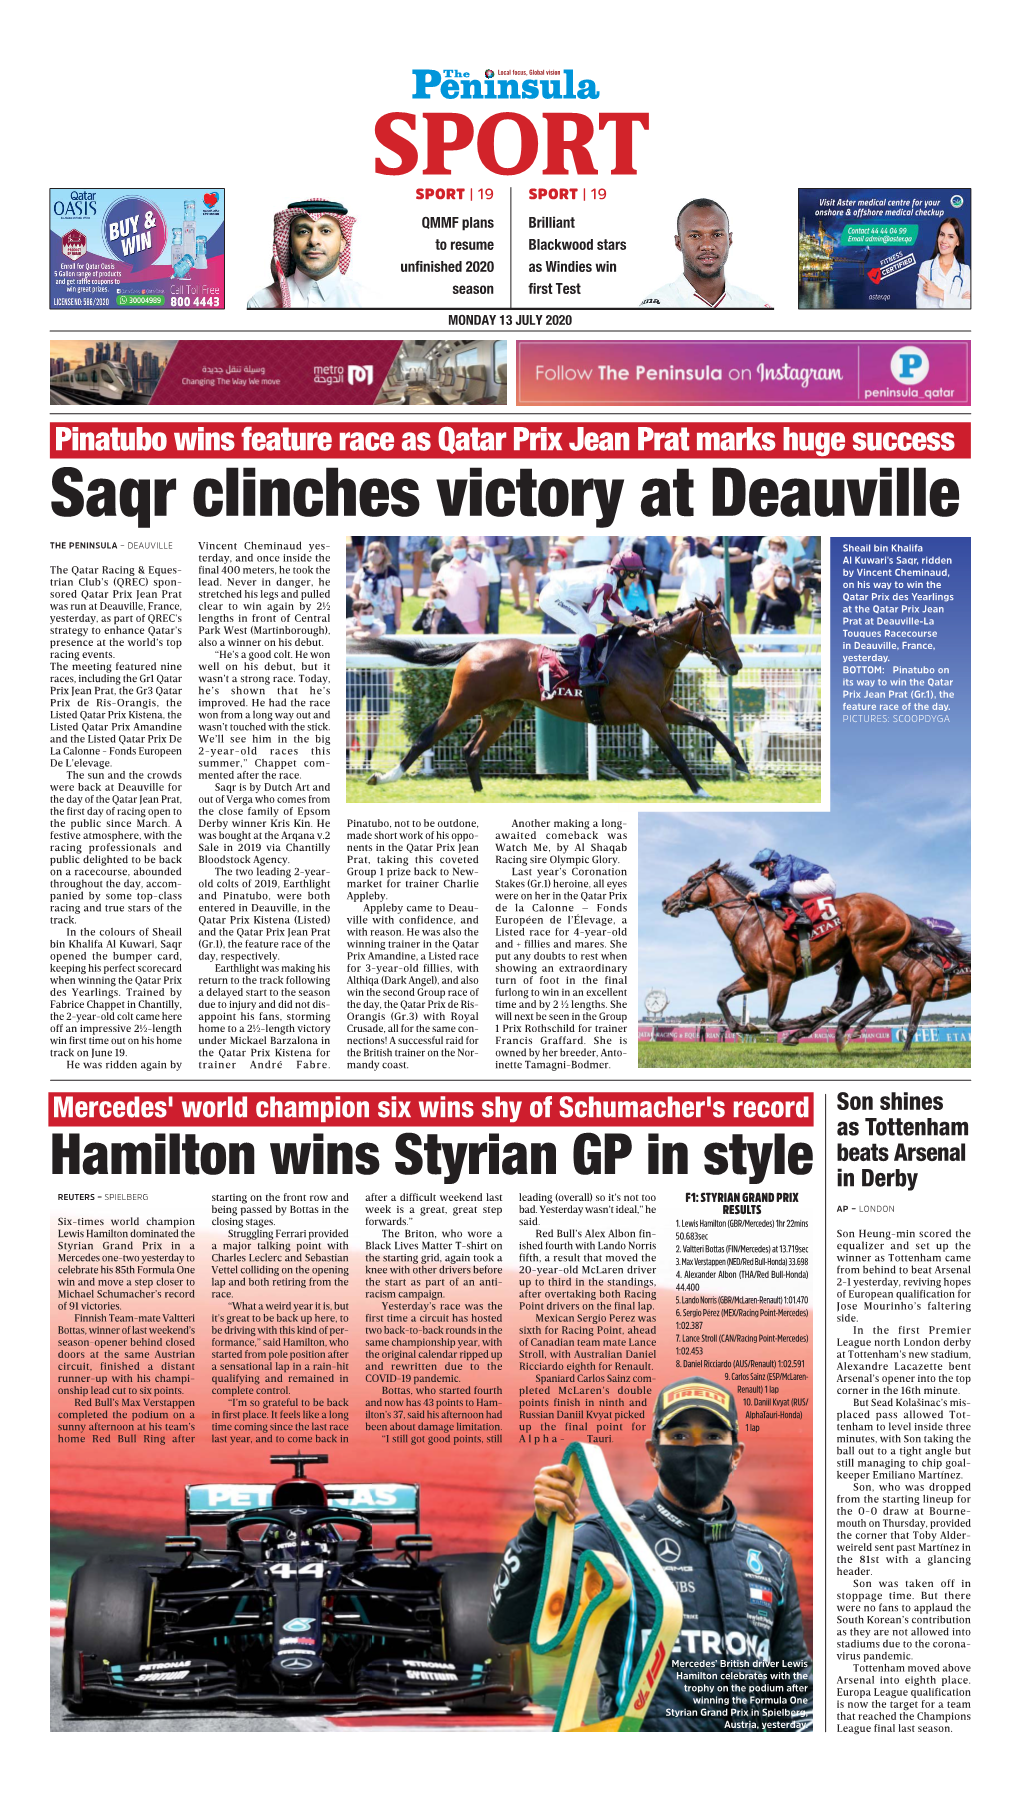 Saqr Clinches Victory at Deauville